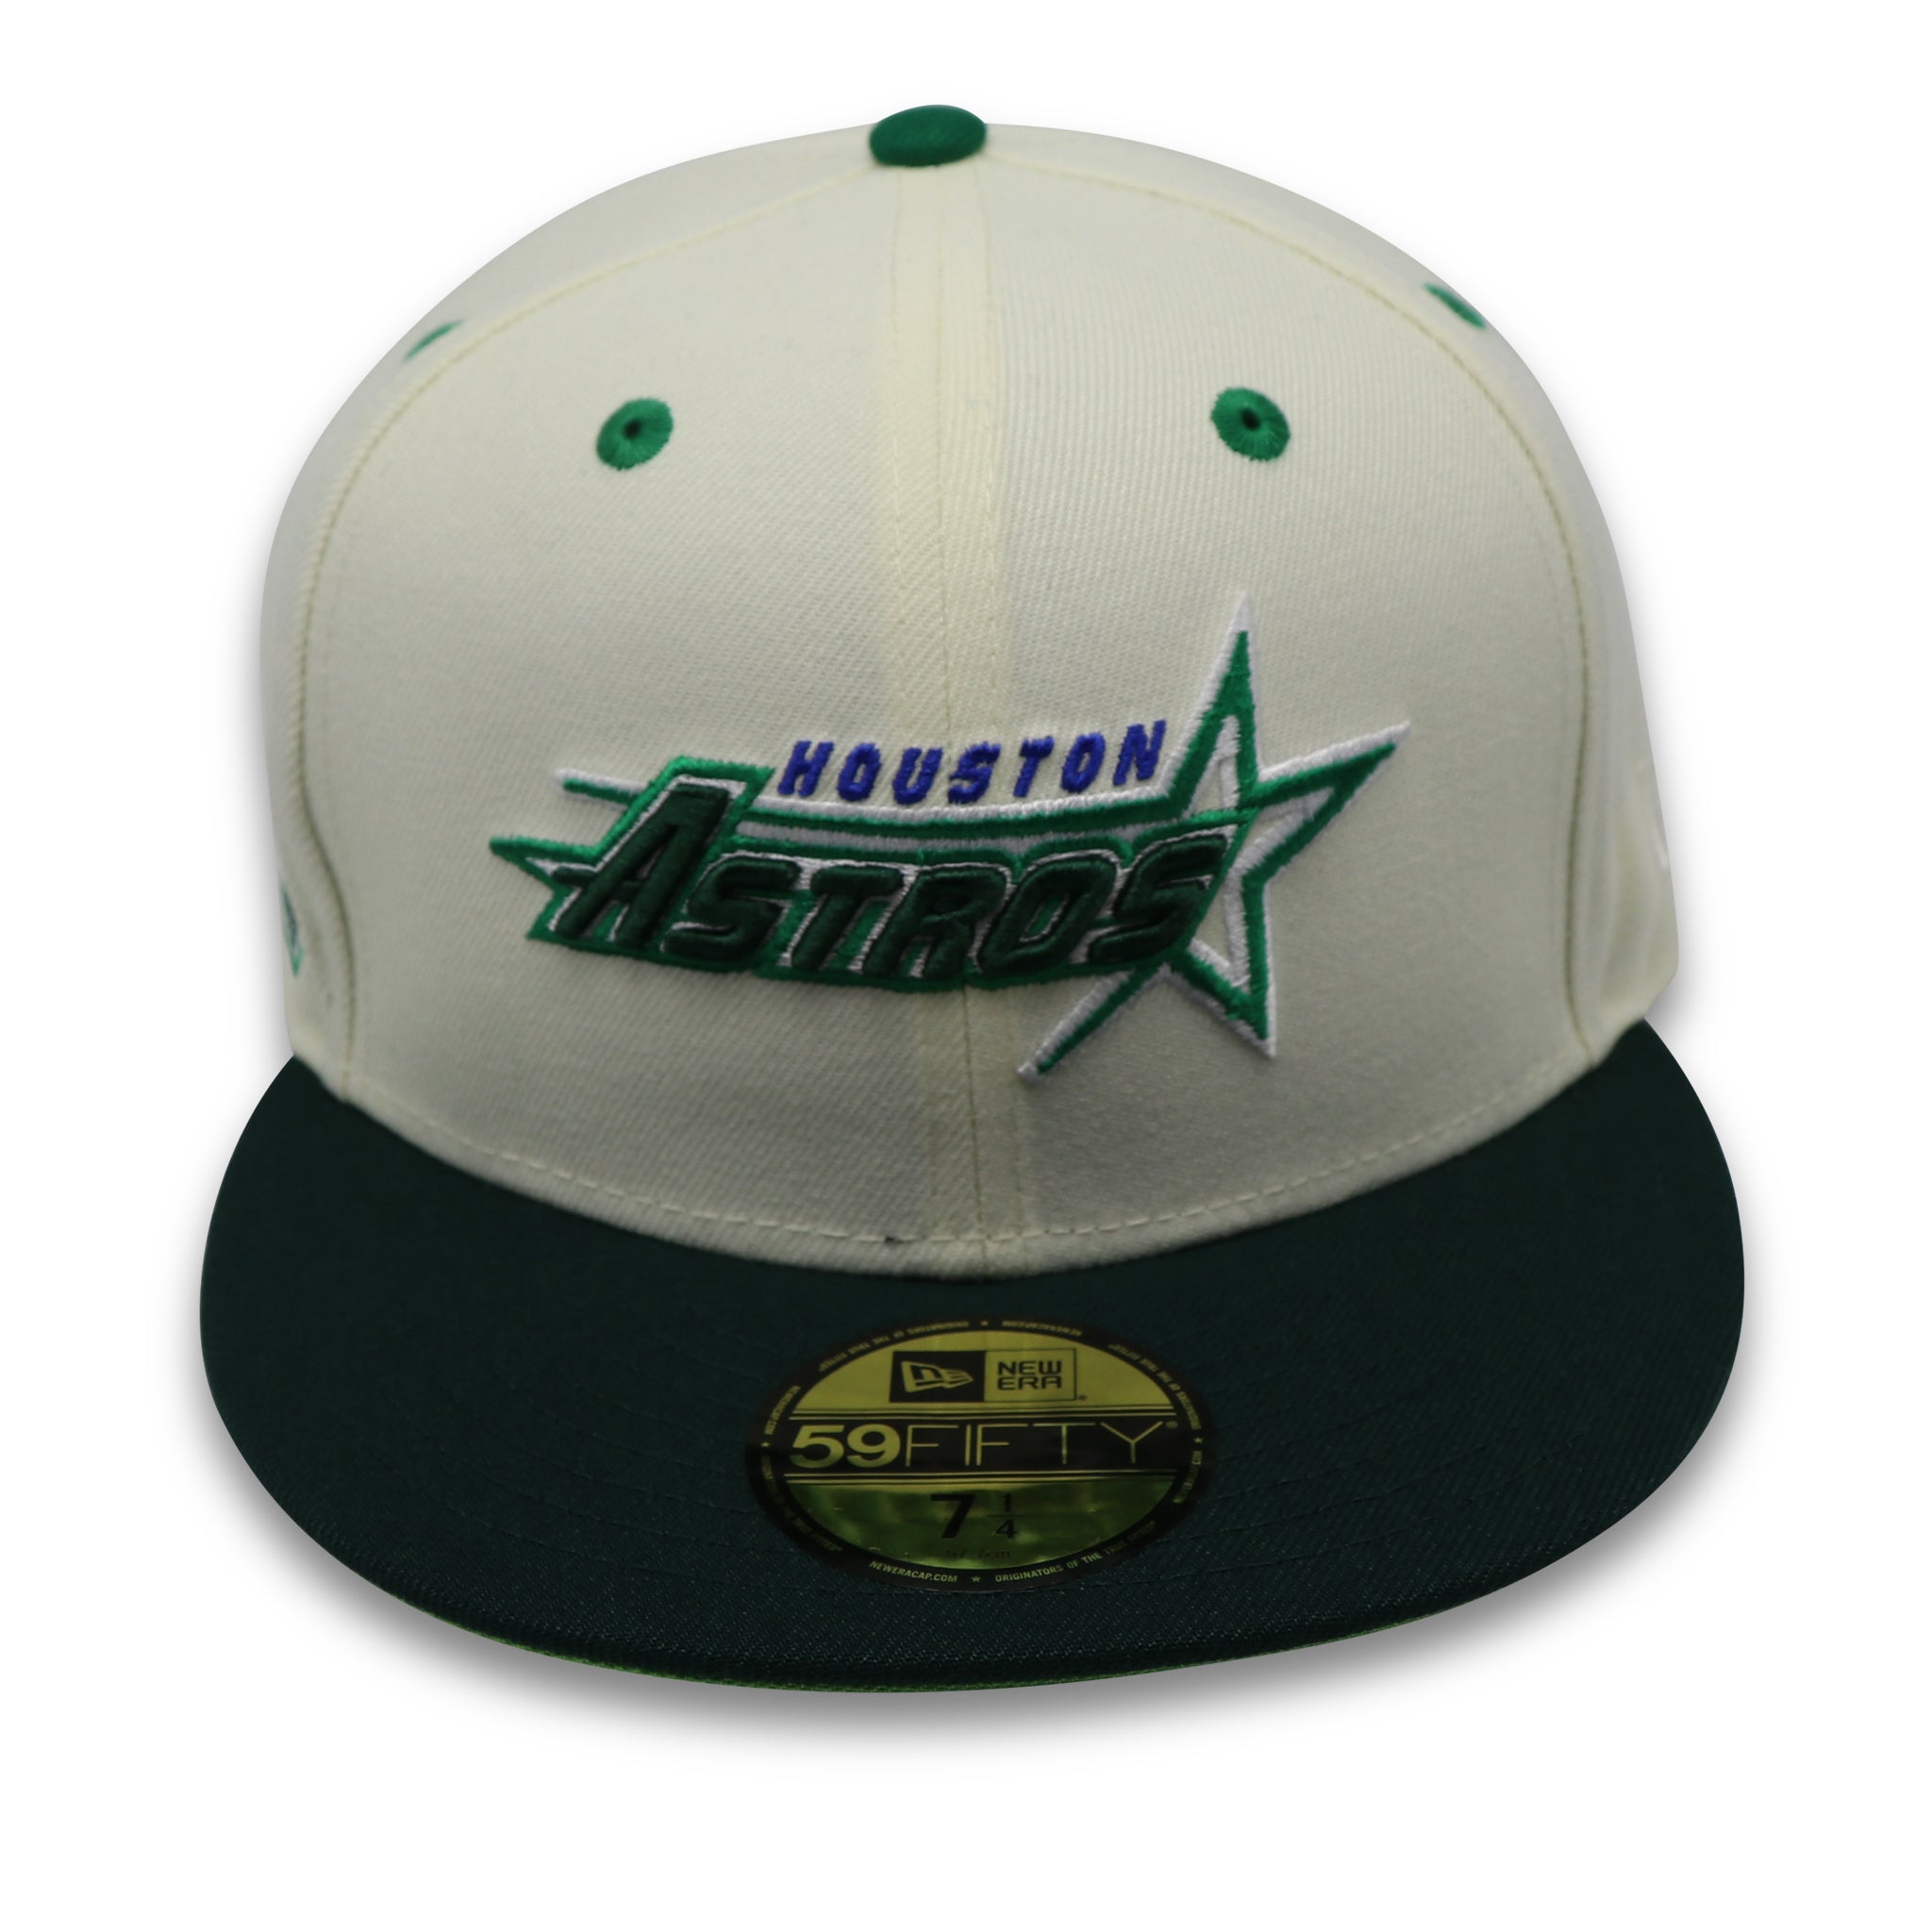 HOUSTON ASTROS (ASTRODOME) NEW ERA 59FIFTY FITTED (LIME UNDER VISOR) (S)